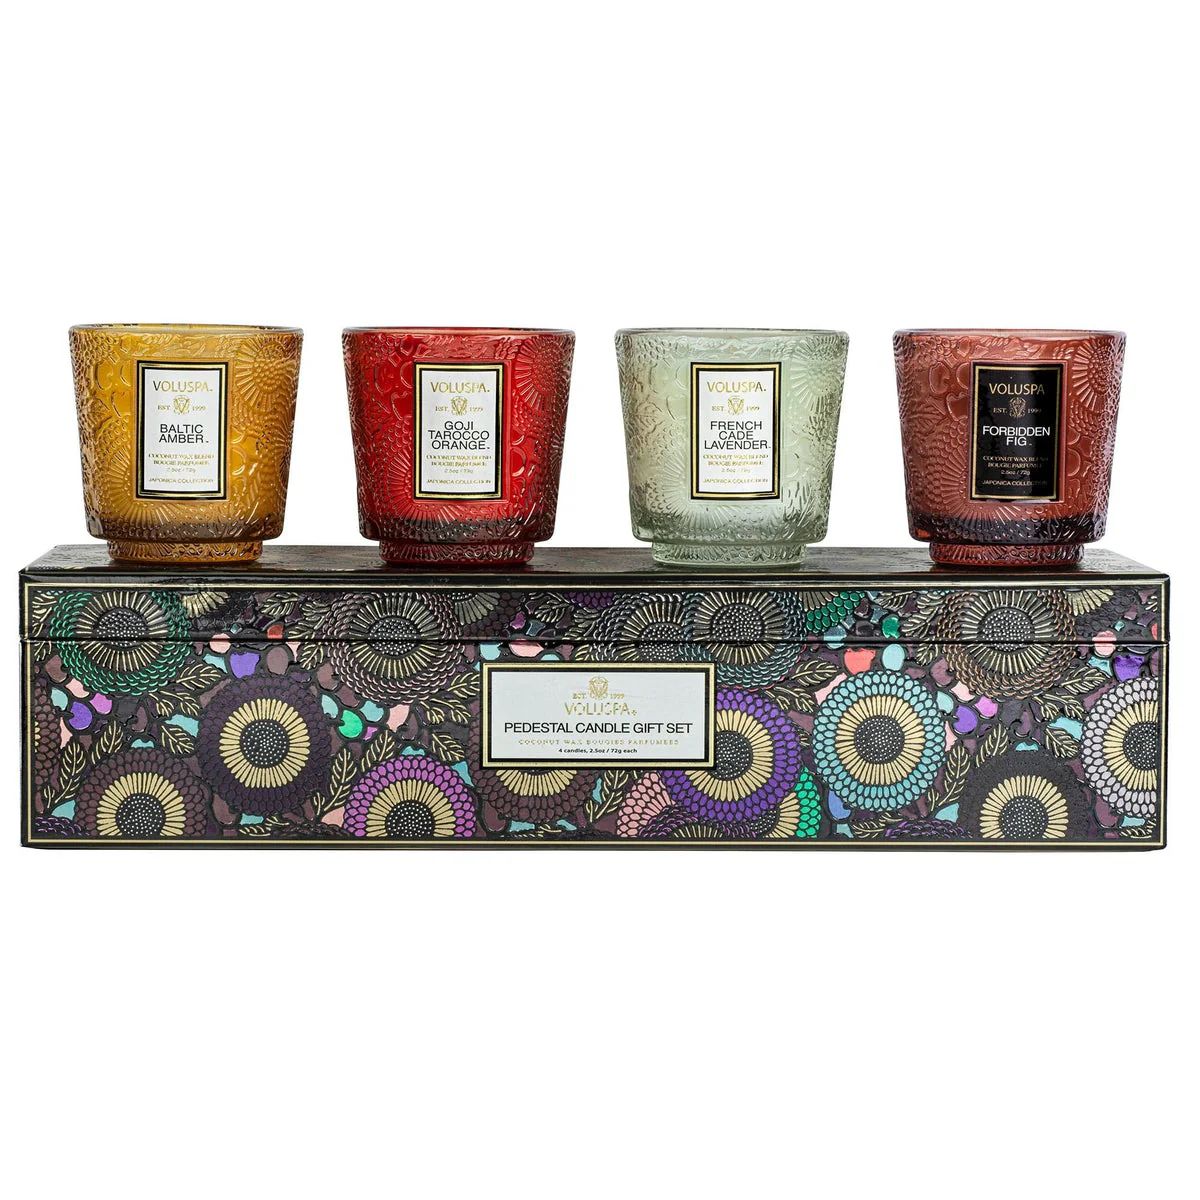 Voluspa - Japonica Best-Sellers 4 Petite Pedestal Candle Gift Set | NewCo Beauty